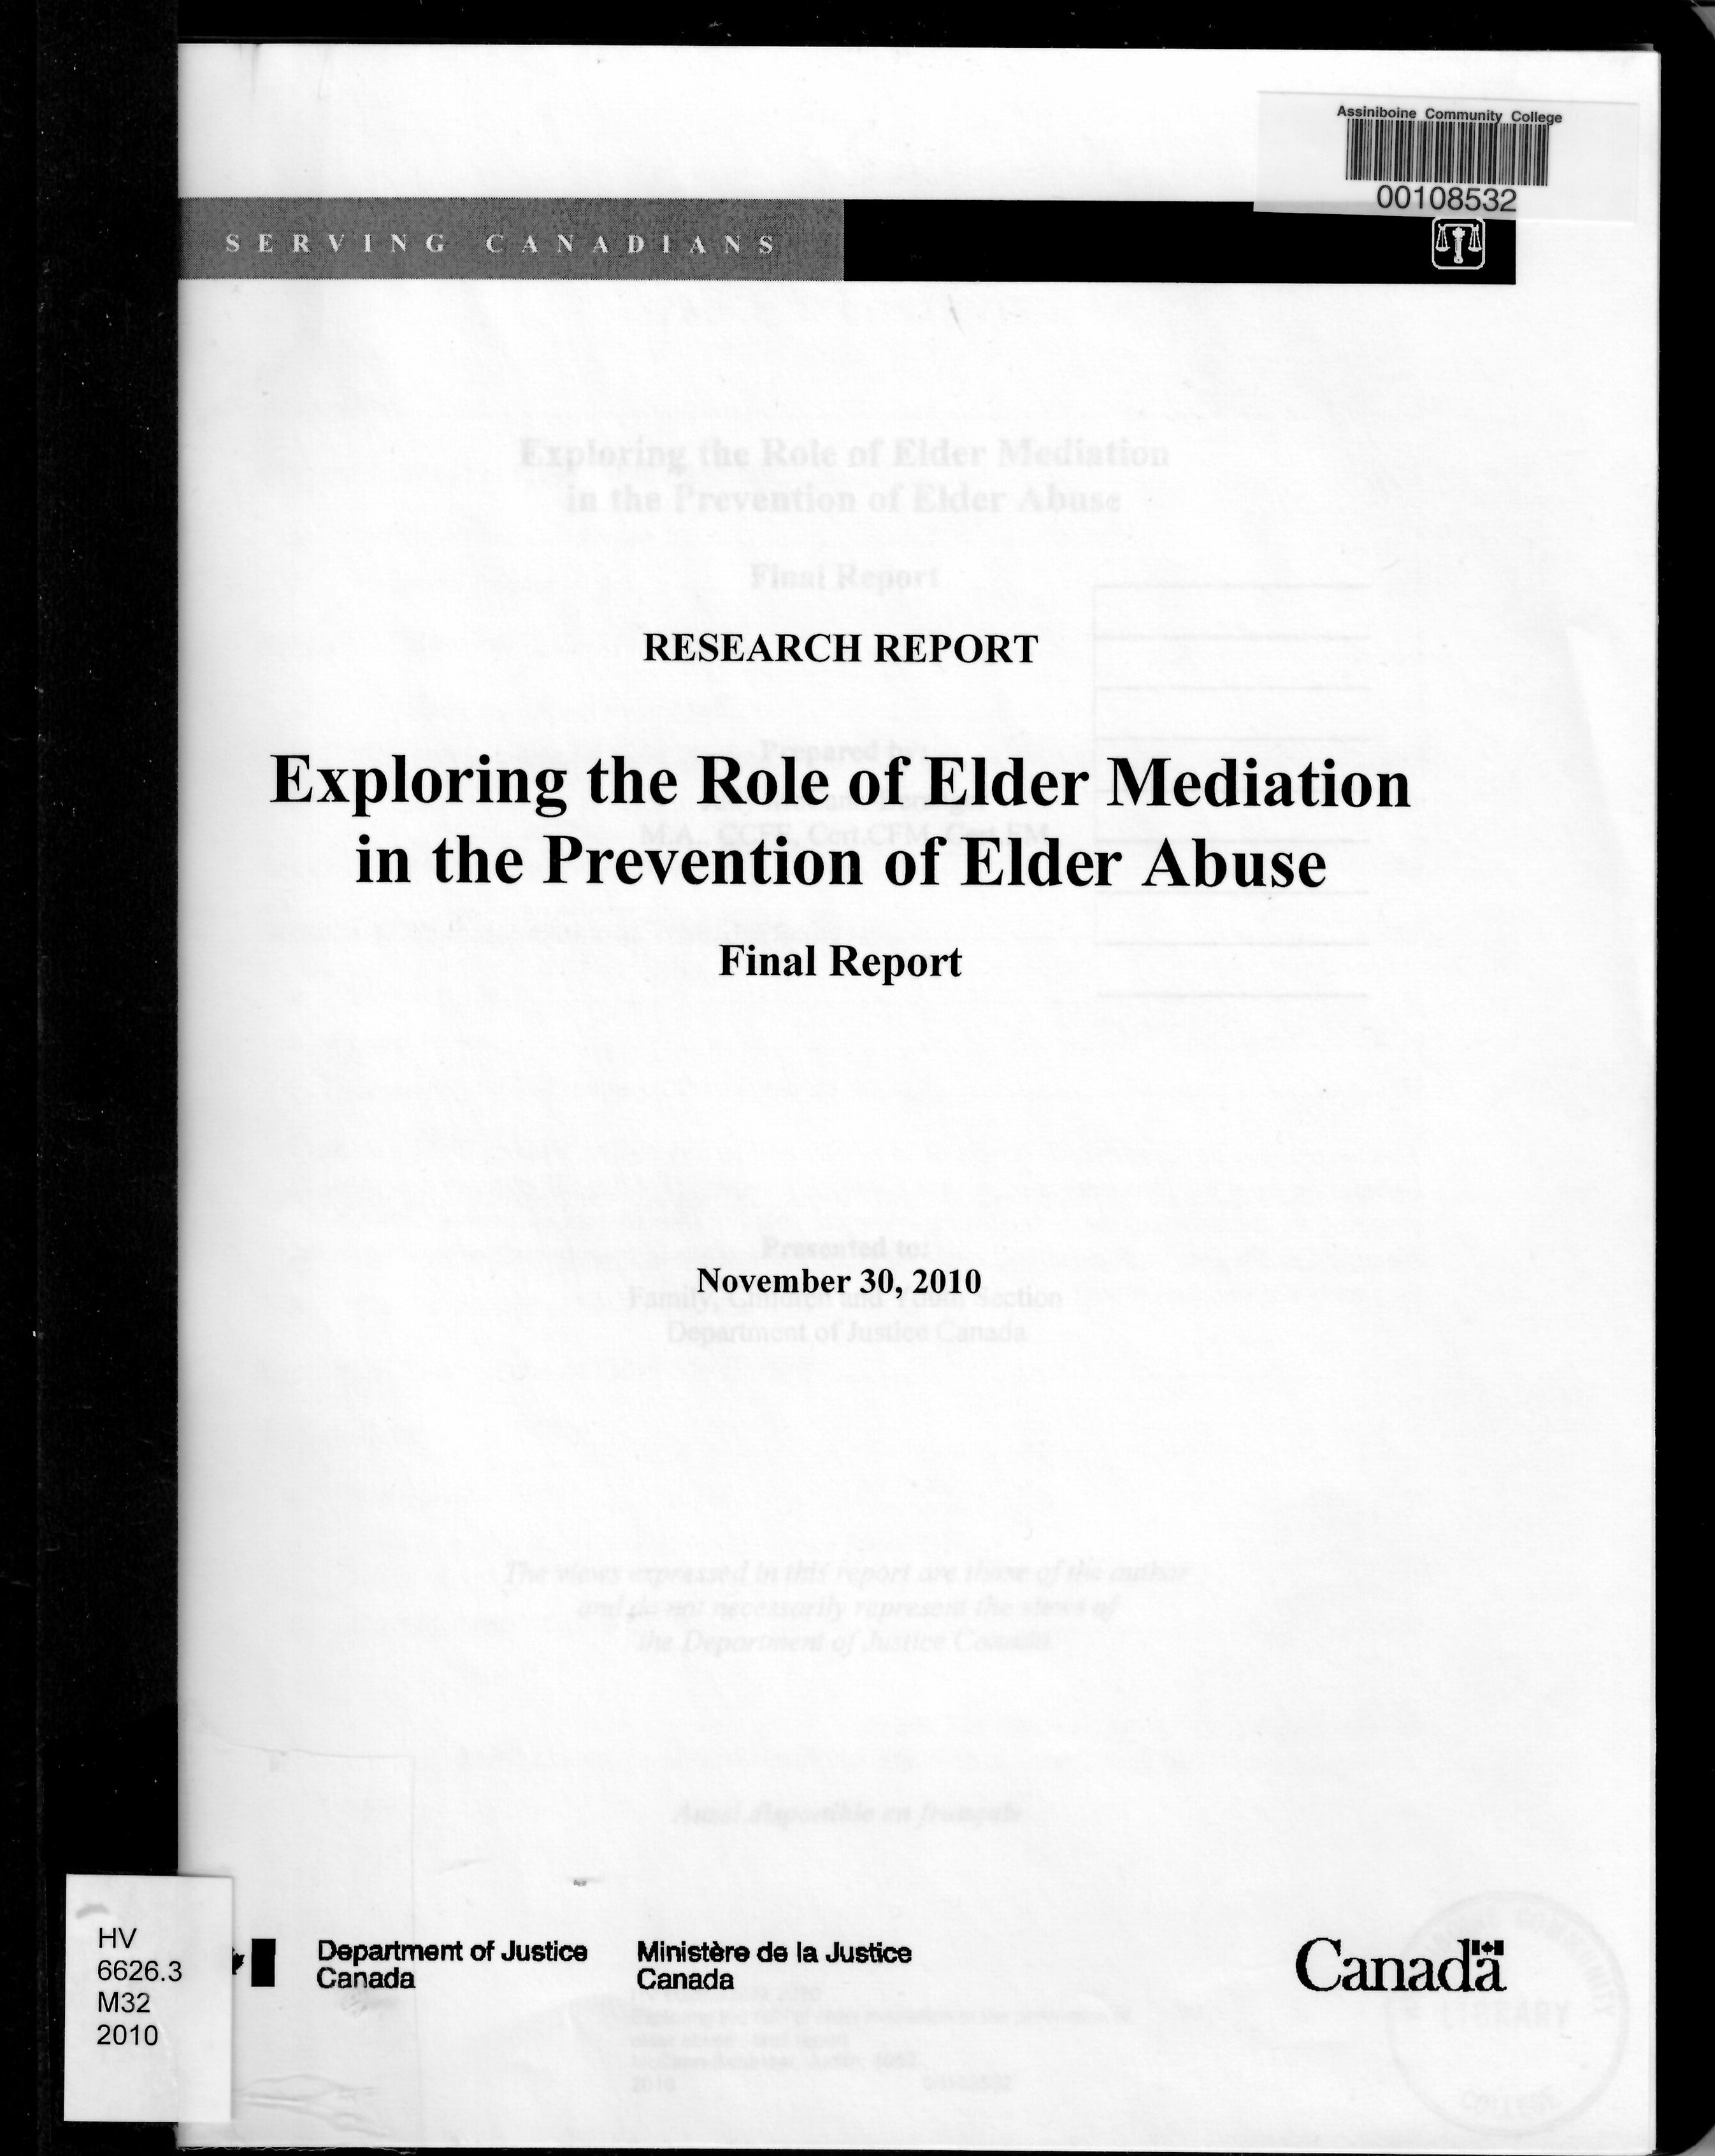 Exploring the role of elder mediation in the prevention of elder abuse : final report